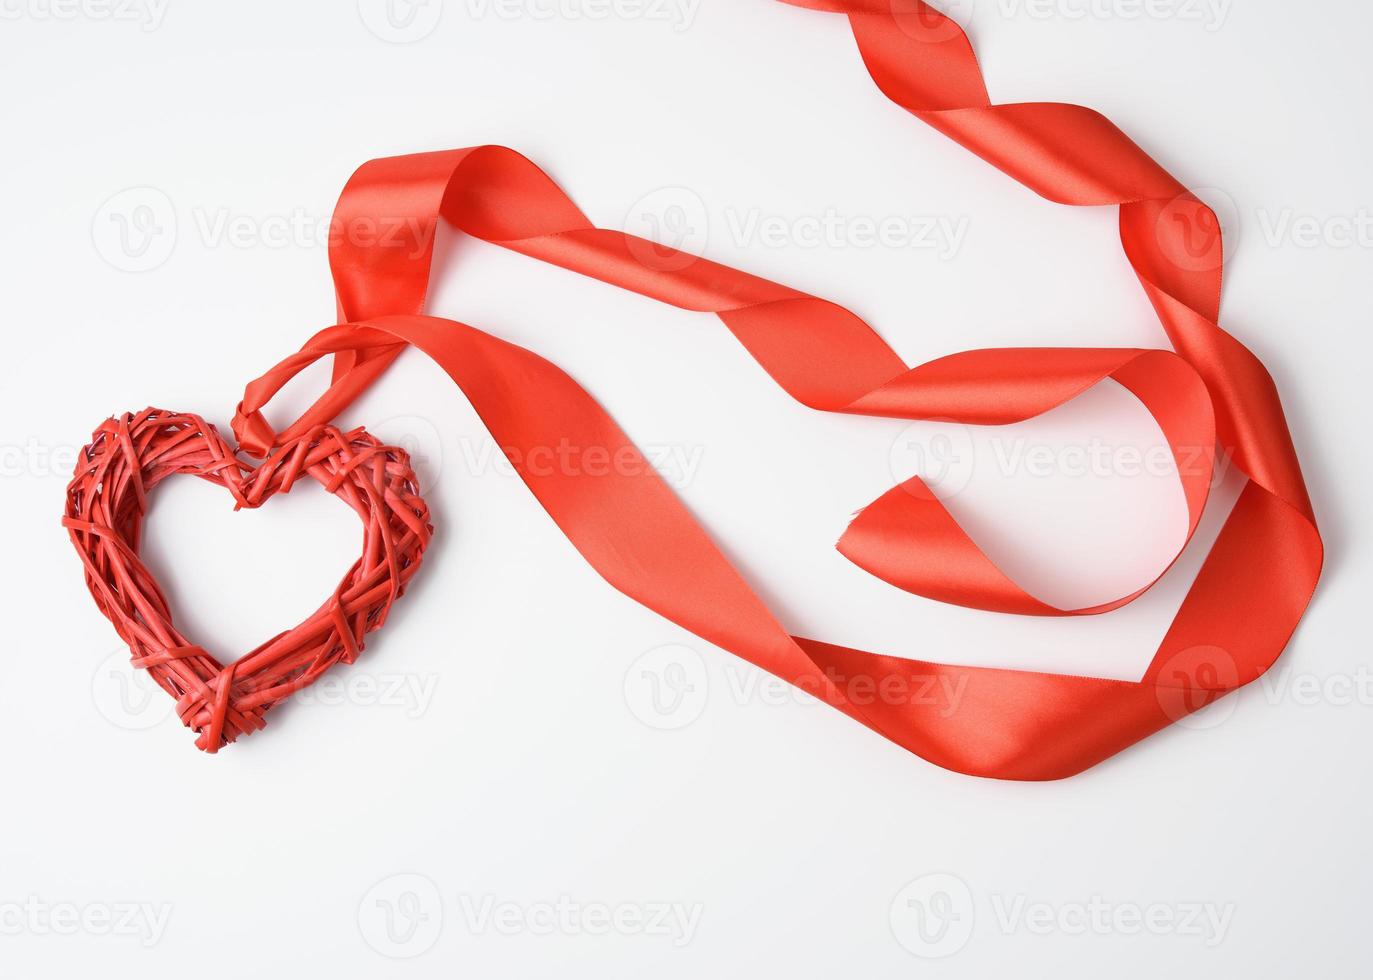 red braided heart and twisted silk ribbon on white background photo